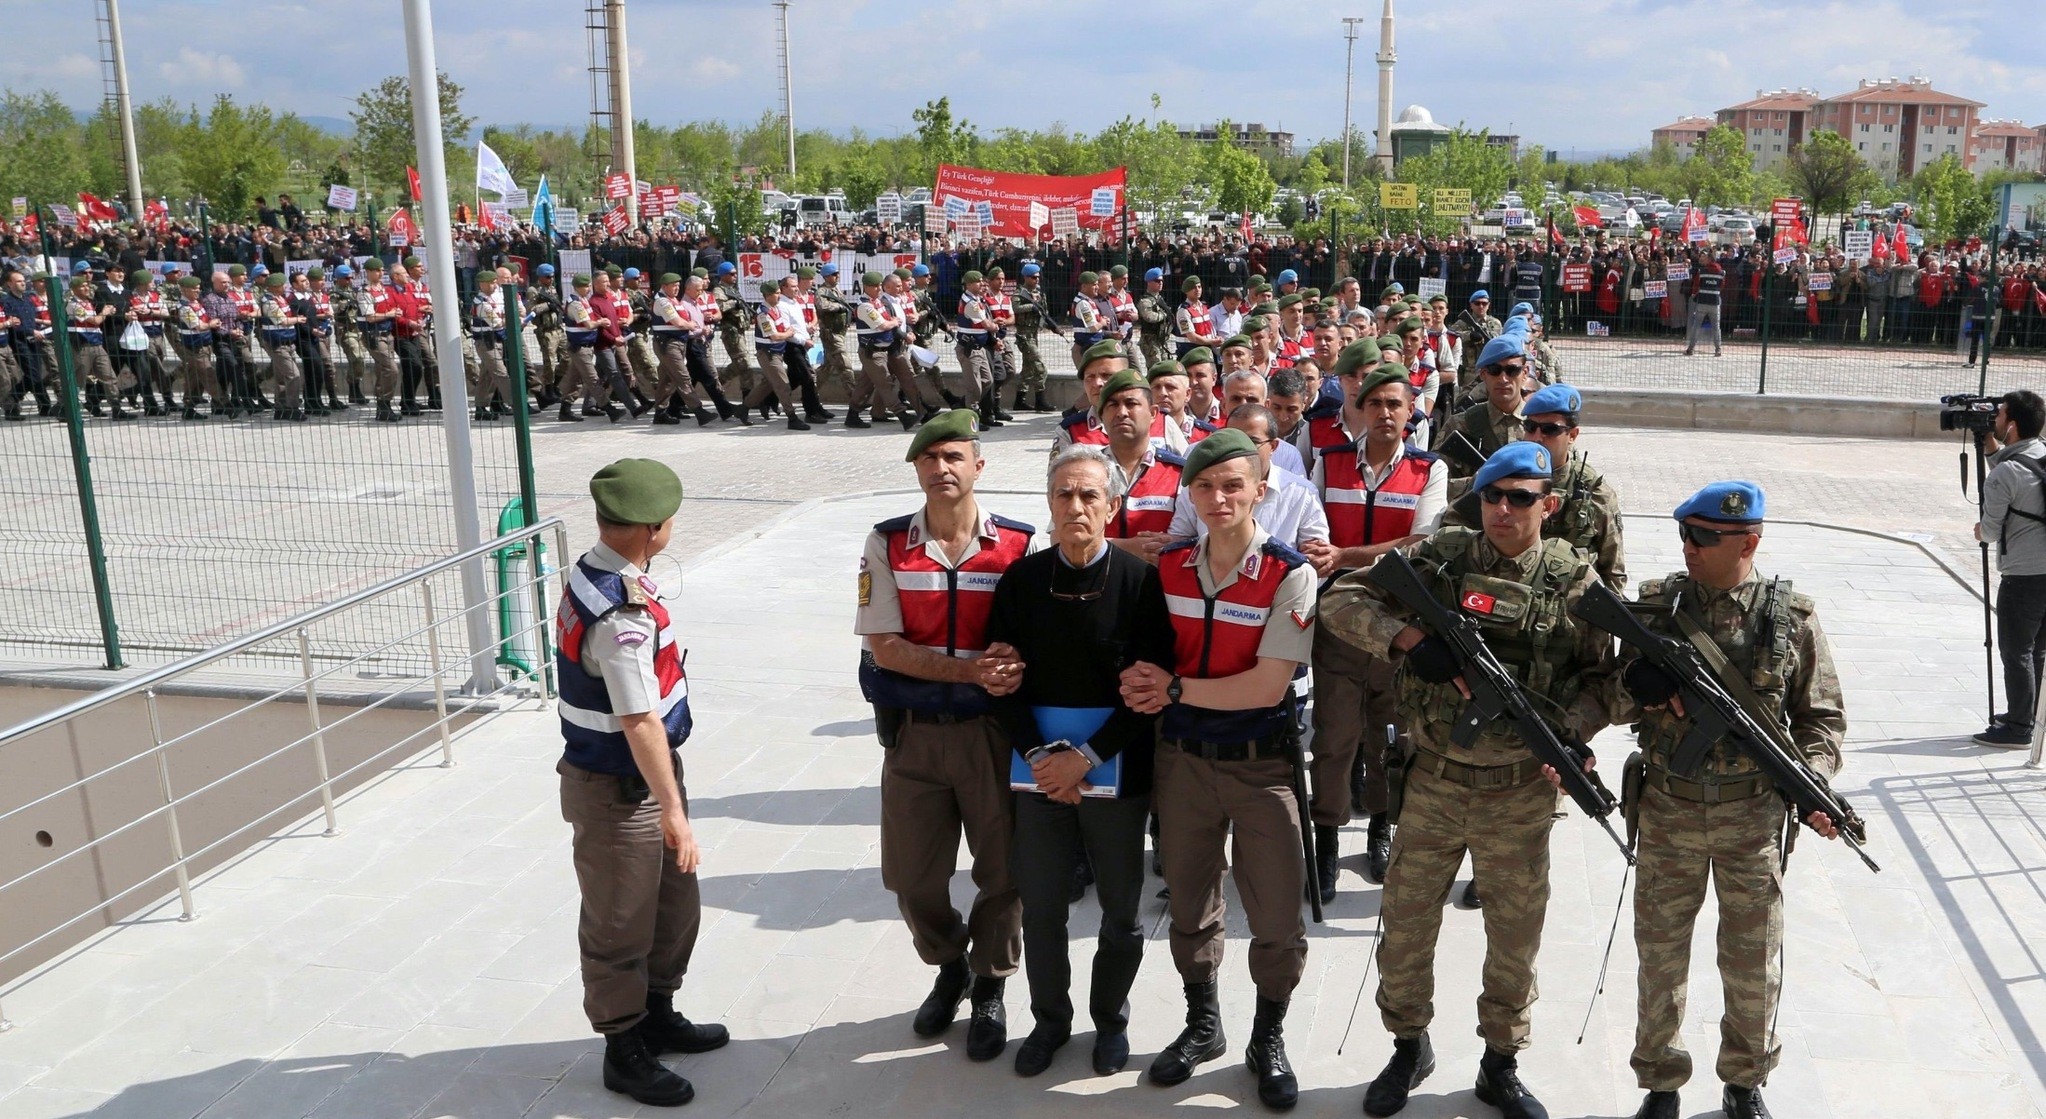 Turkish Gendarmerie escort defendants Akin u00d6ztu00fcrk (3L) and others involved in July 15, 2016u2019s attempted coup as they leave the prison where they are being held, ahead of their trial in Ankara in 2017.